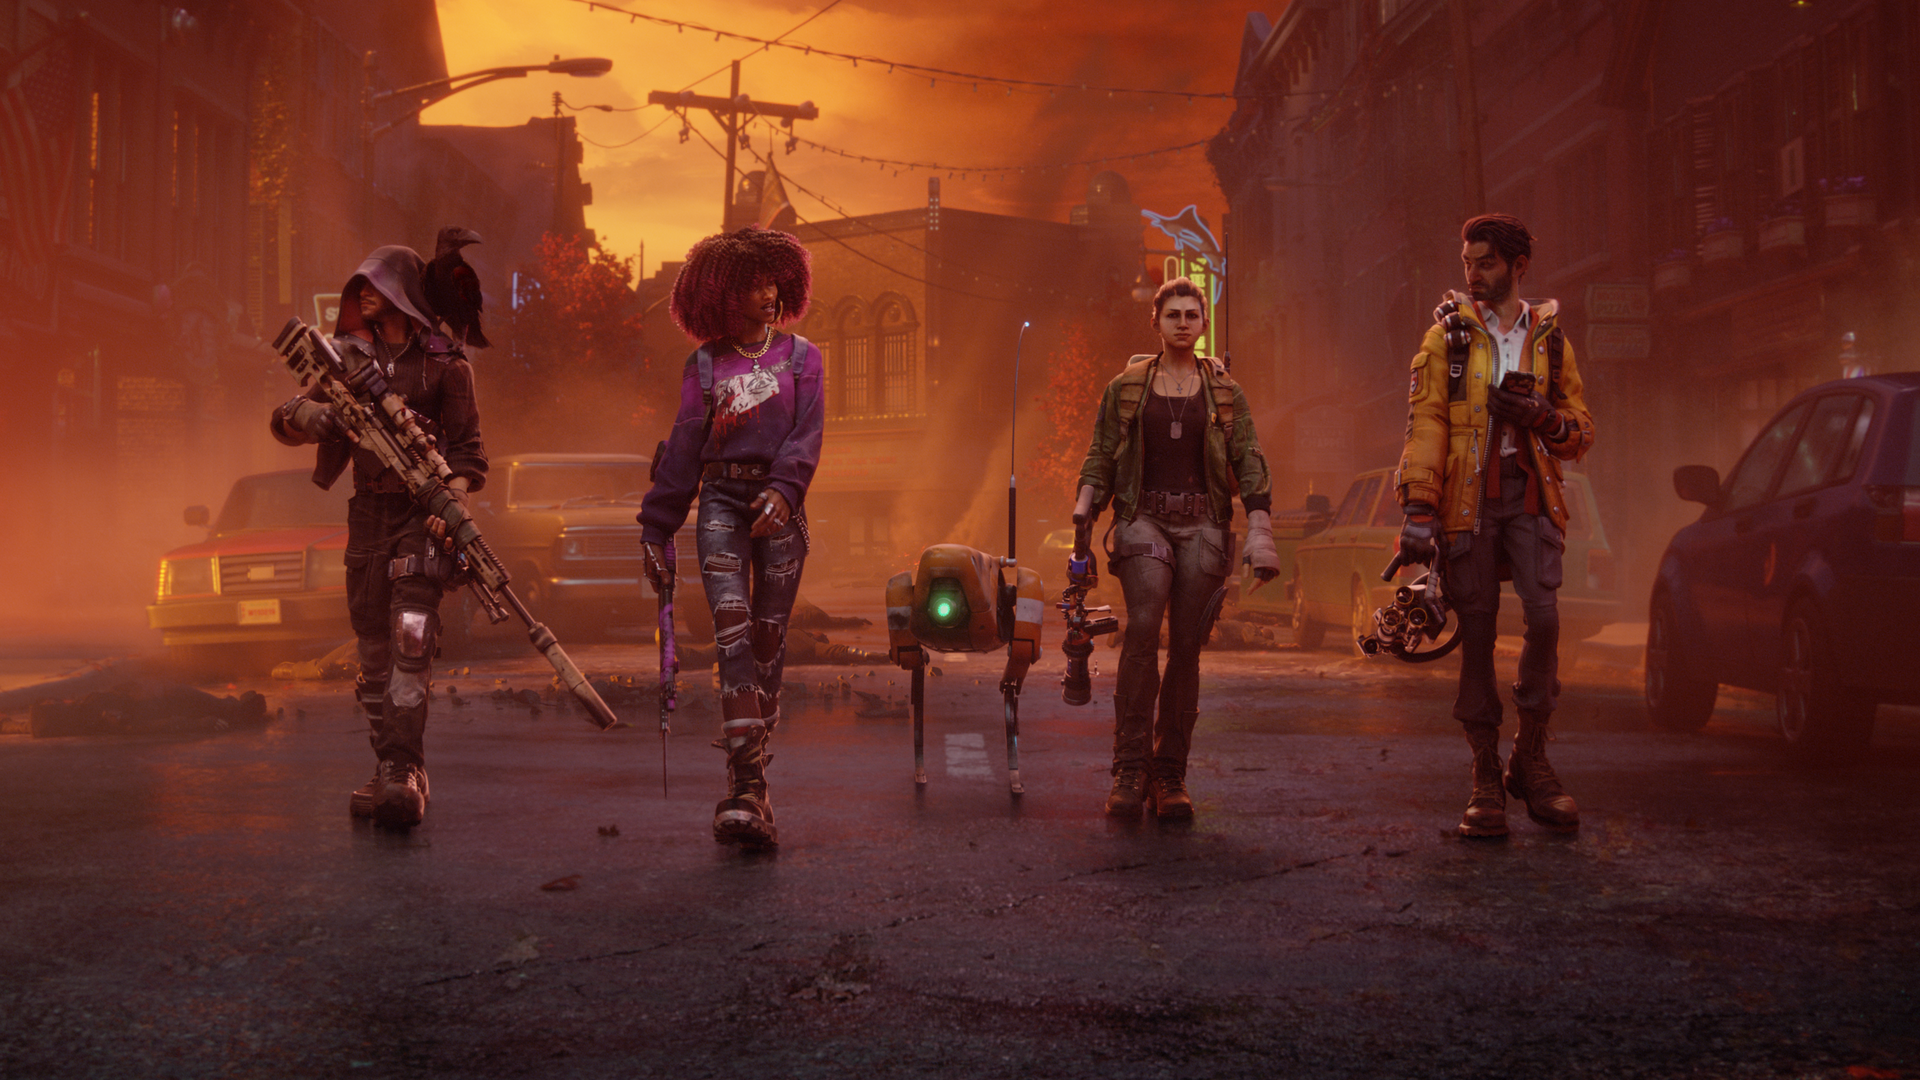 Four characters fro the game "Redfall" walking down a street. 